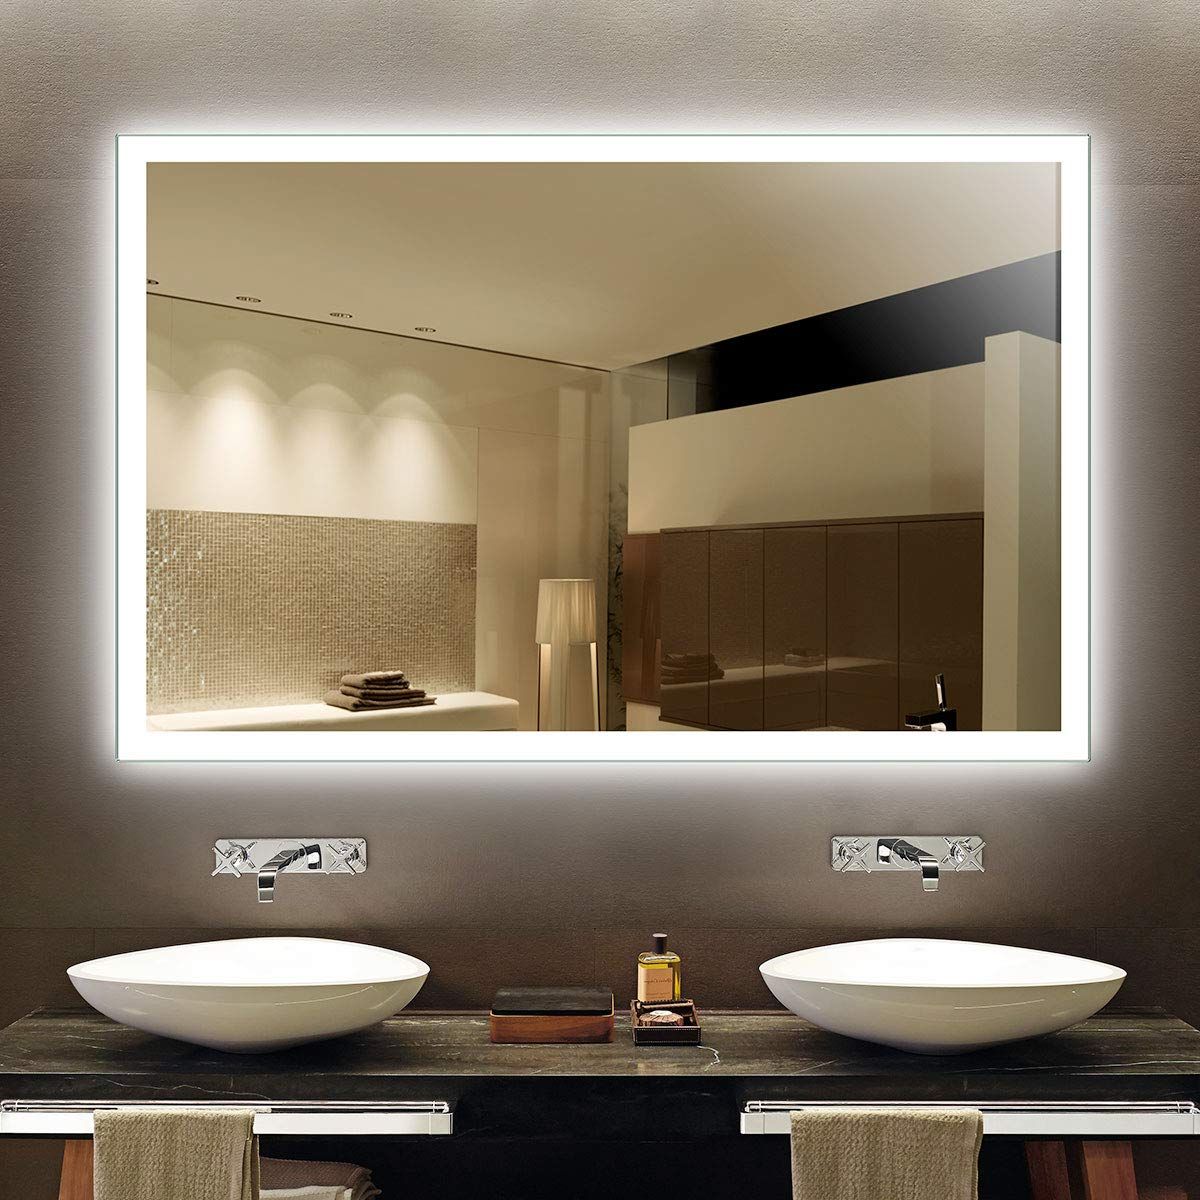 Large Lighted Bathroom Wall Mirrors Intended For Most Popular Dp Home Illuminated Bathroom Large Mirror With Infrared Sensor 55 X 36 In Led Lighted Vanity Sink Silver Mirror Wall Mounted E N031 Cg 